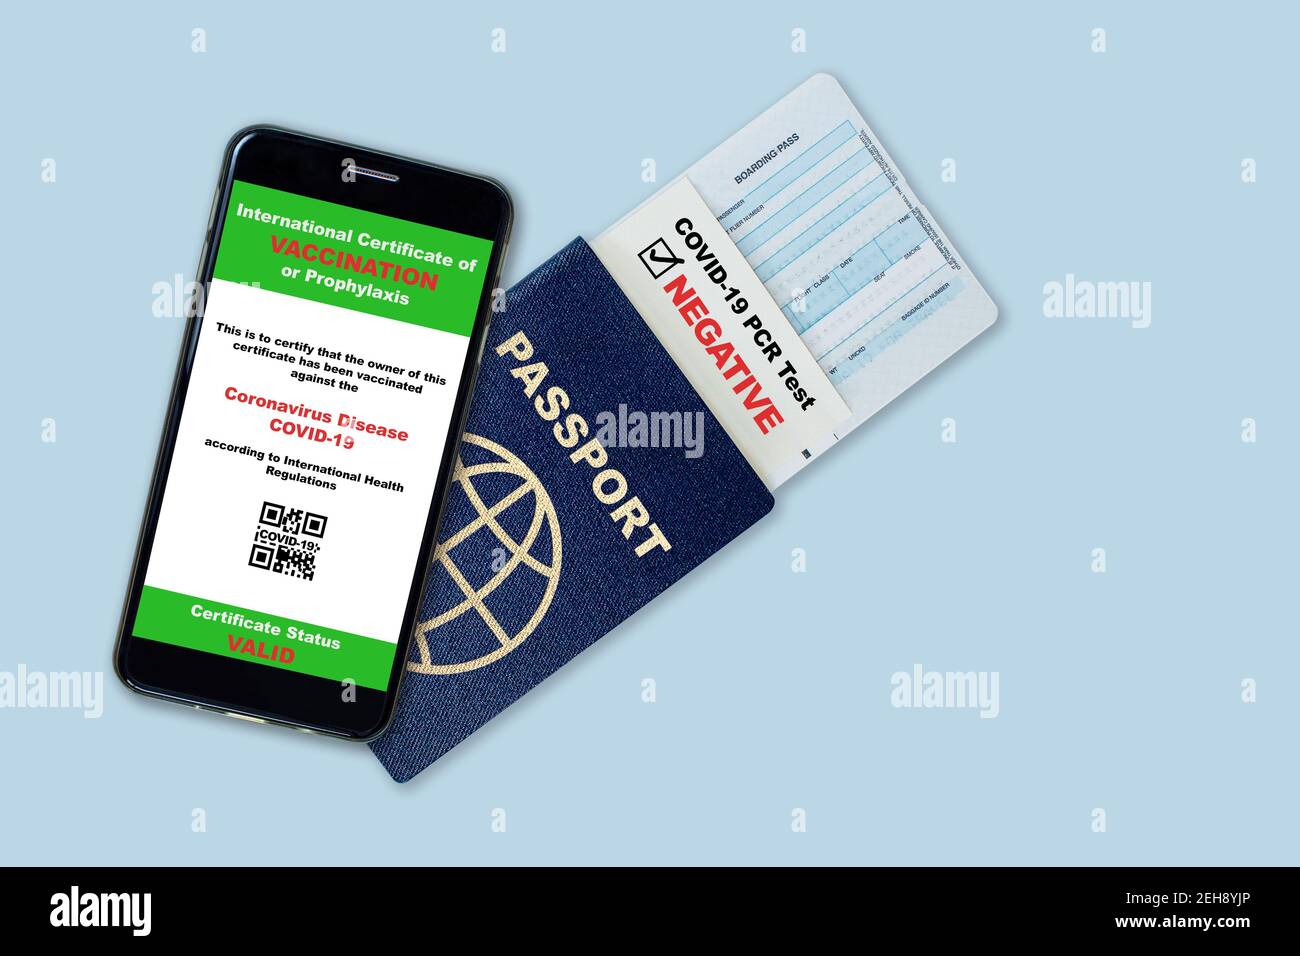 Smartphone on travel passport, boarding pass with digital certificate of COVID-19 vaccination and proof of negative COVID test result. Concept of new Stock Photo